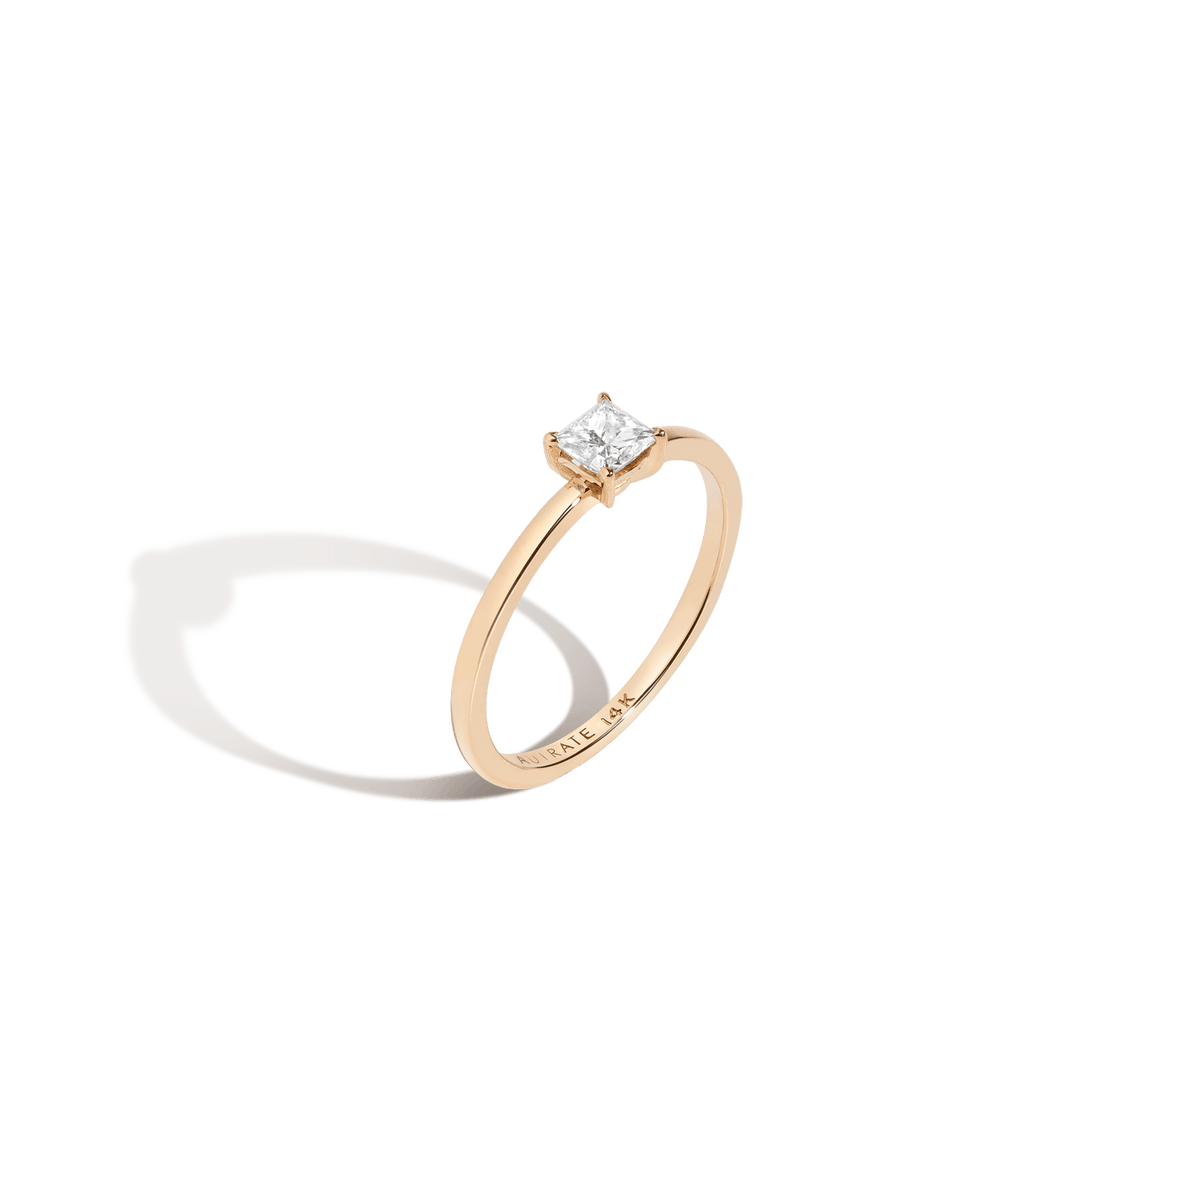 Aurate New York Diamond Tension Ring, 18K Rose Gold, Size 7